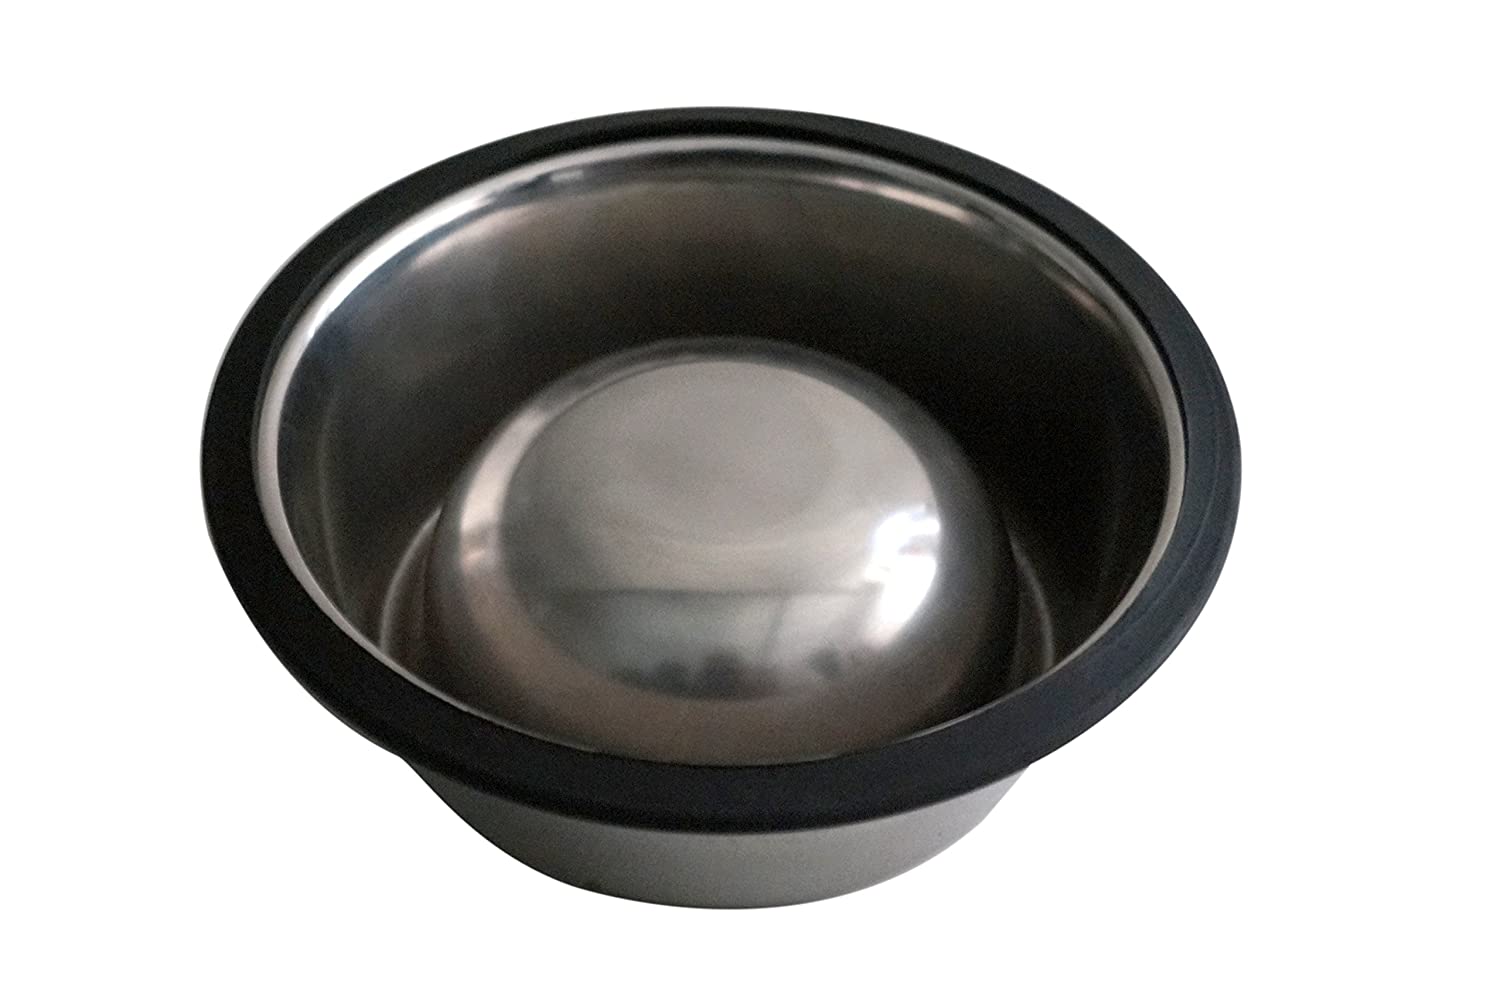 Pets Empire Stainless Steel Dog Food Water Bowl